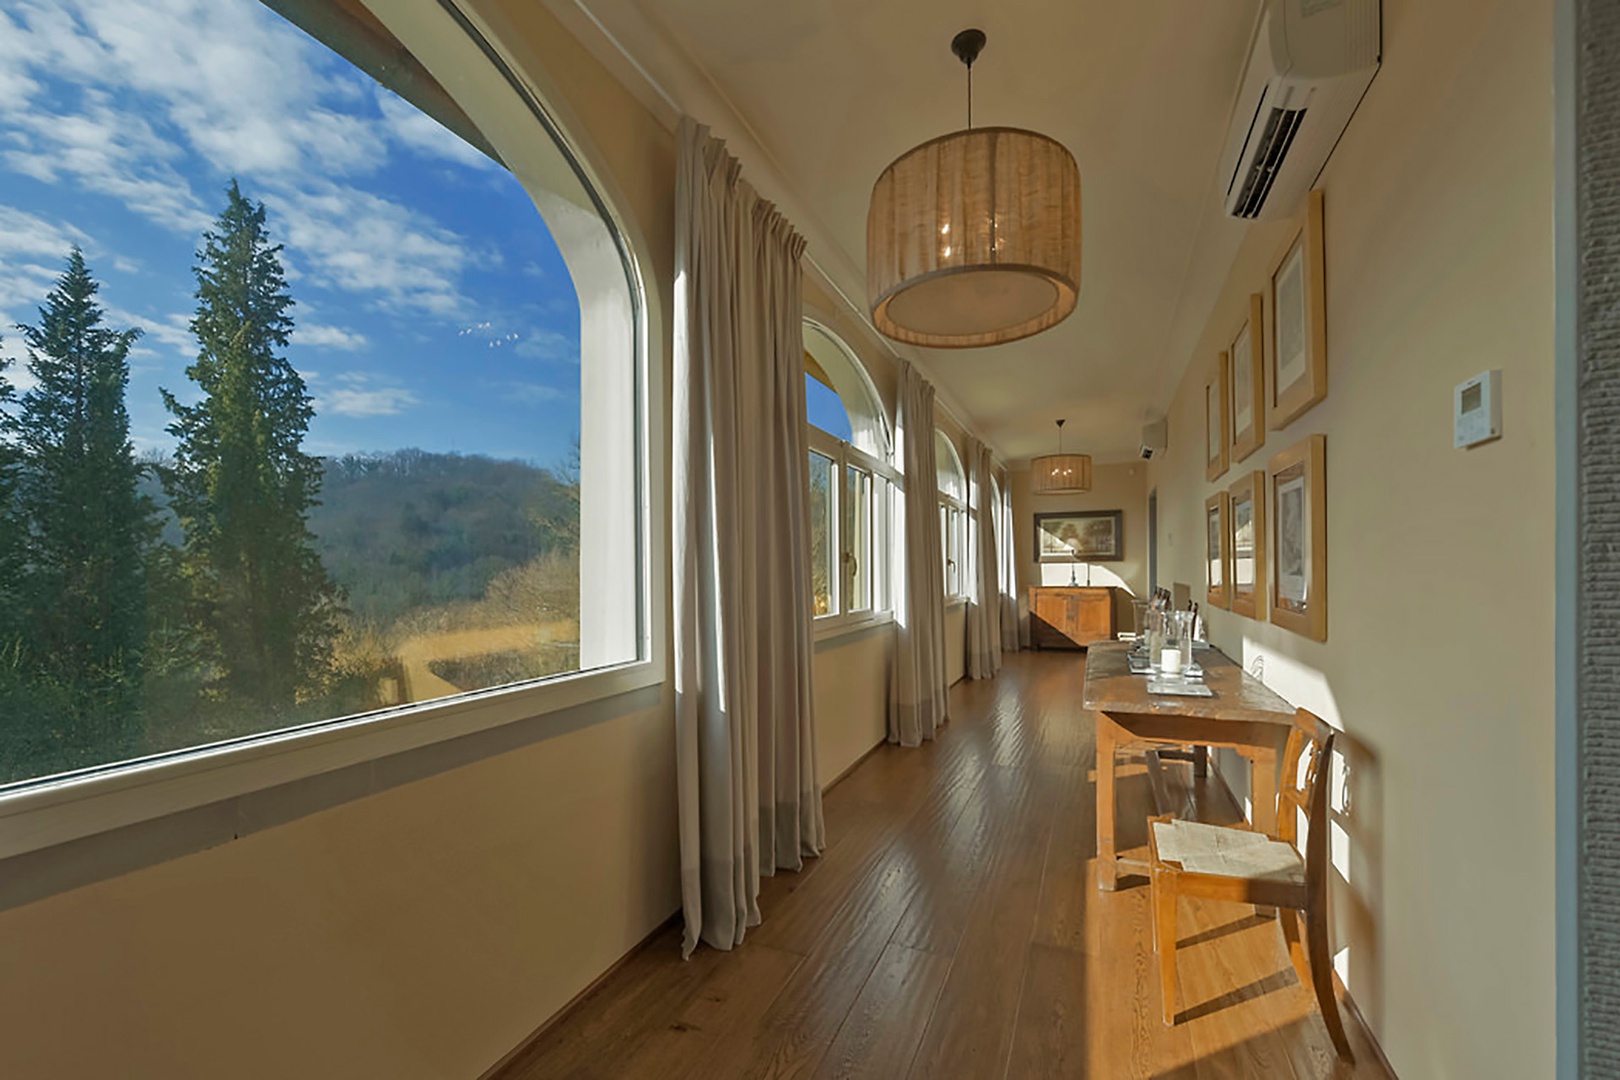 Enclosed loggia runs along the entire front of the house with beautiful views.